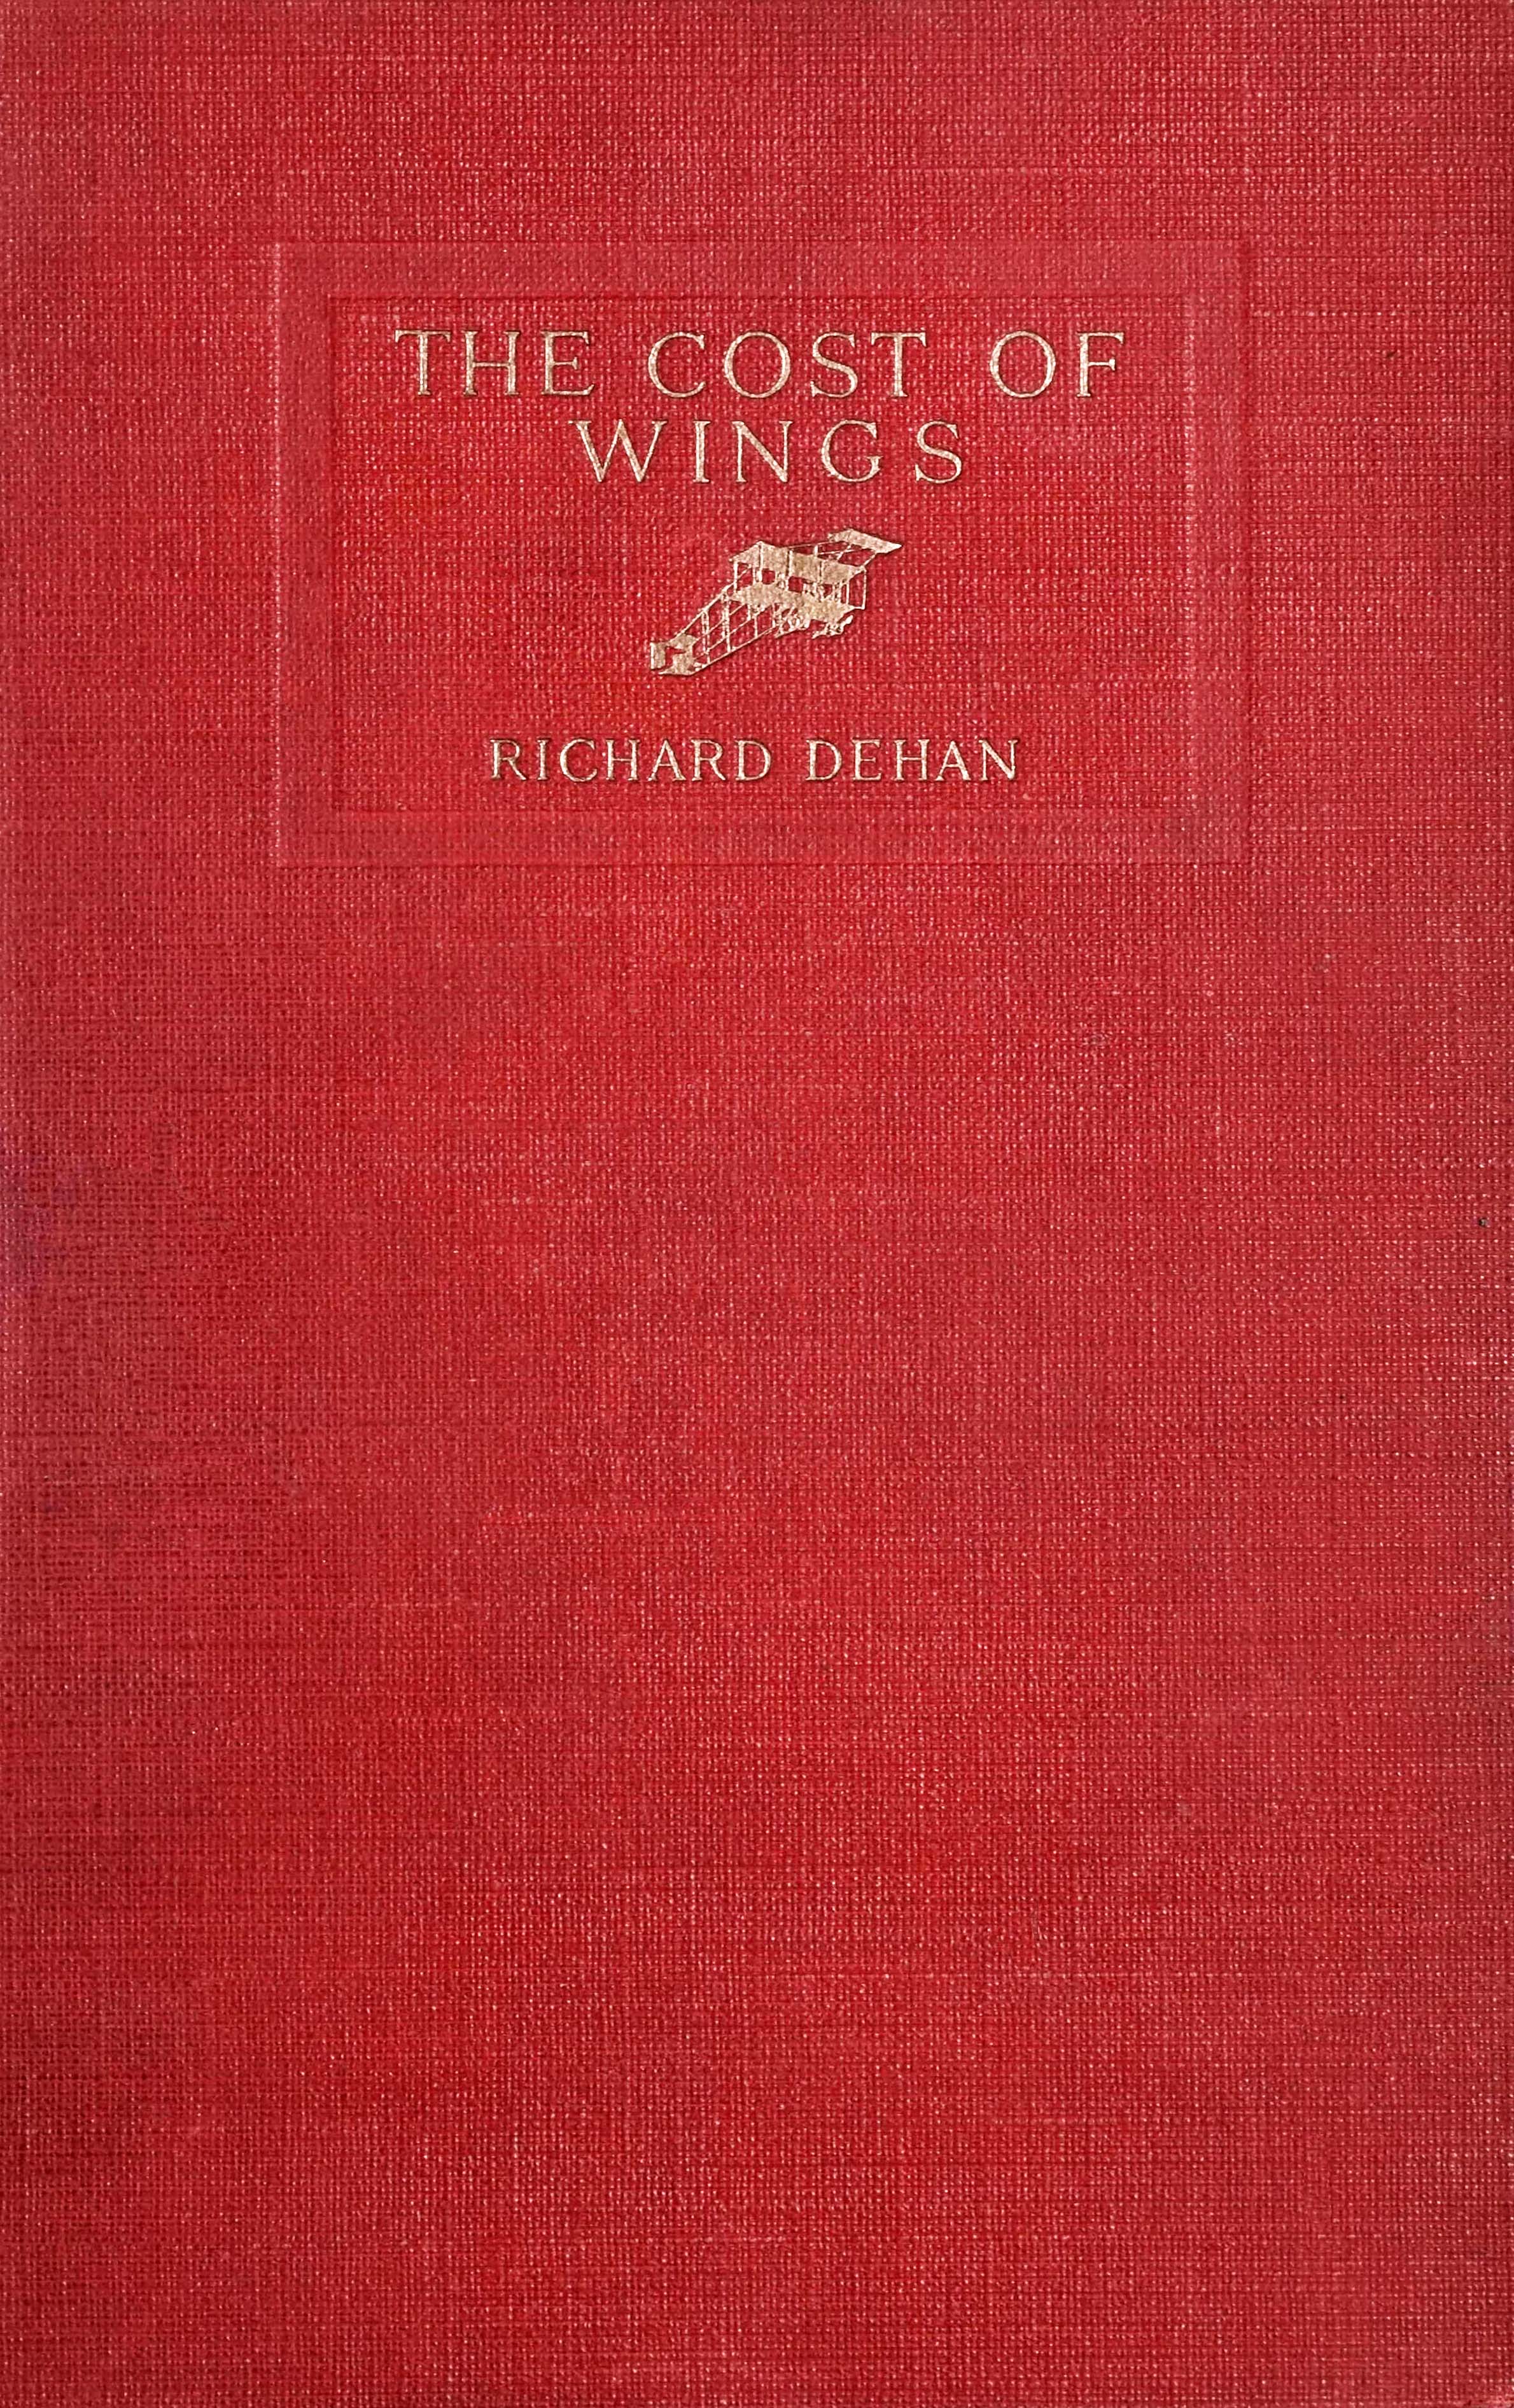 The cost of wings and other stories, by Richard Dehan—A Project Gutenberg eBook image